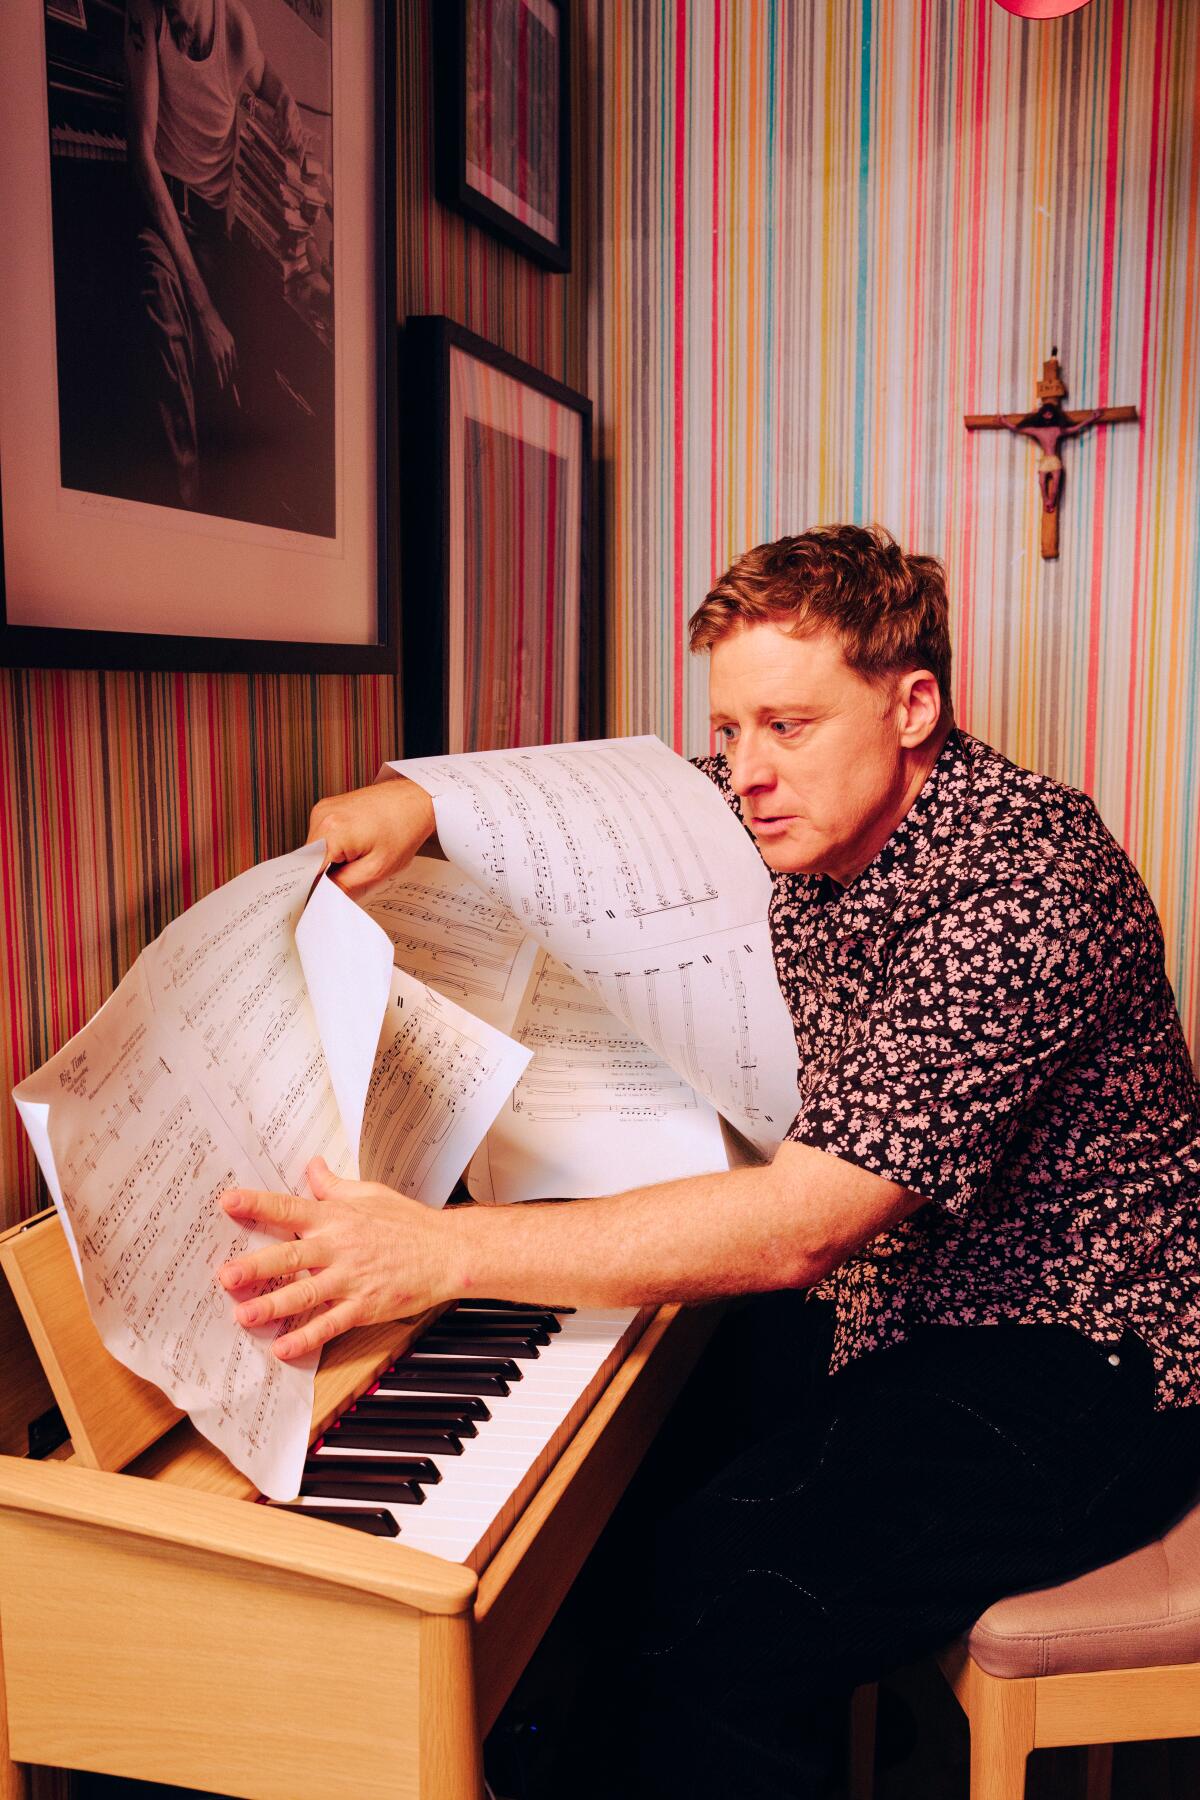 Alan Tudyk gets a little messy with the sheet music at his home piano.